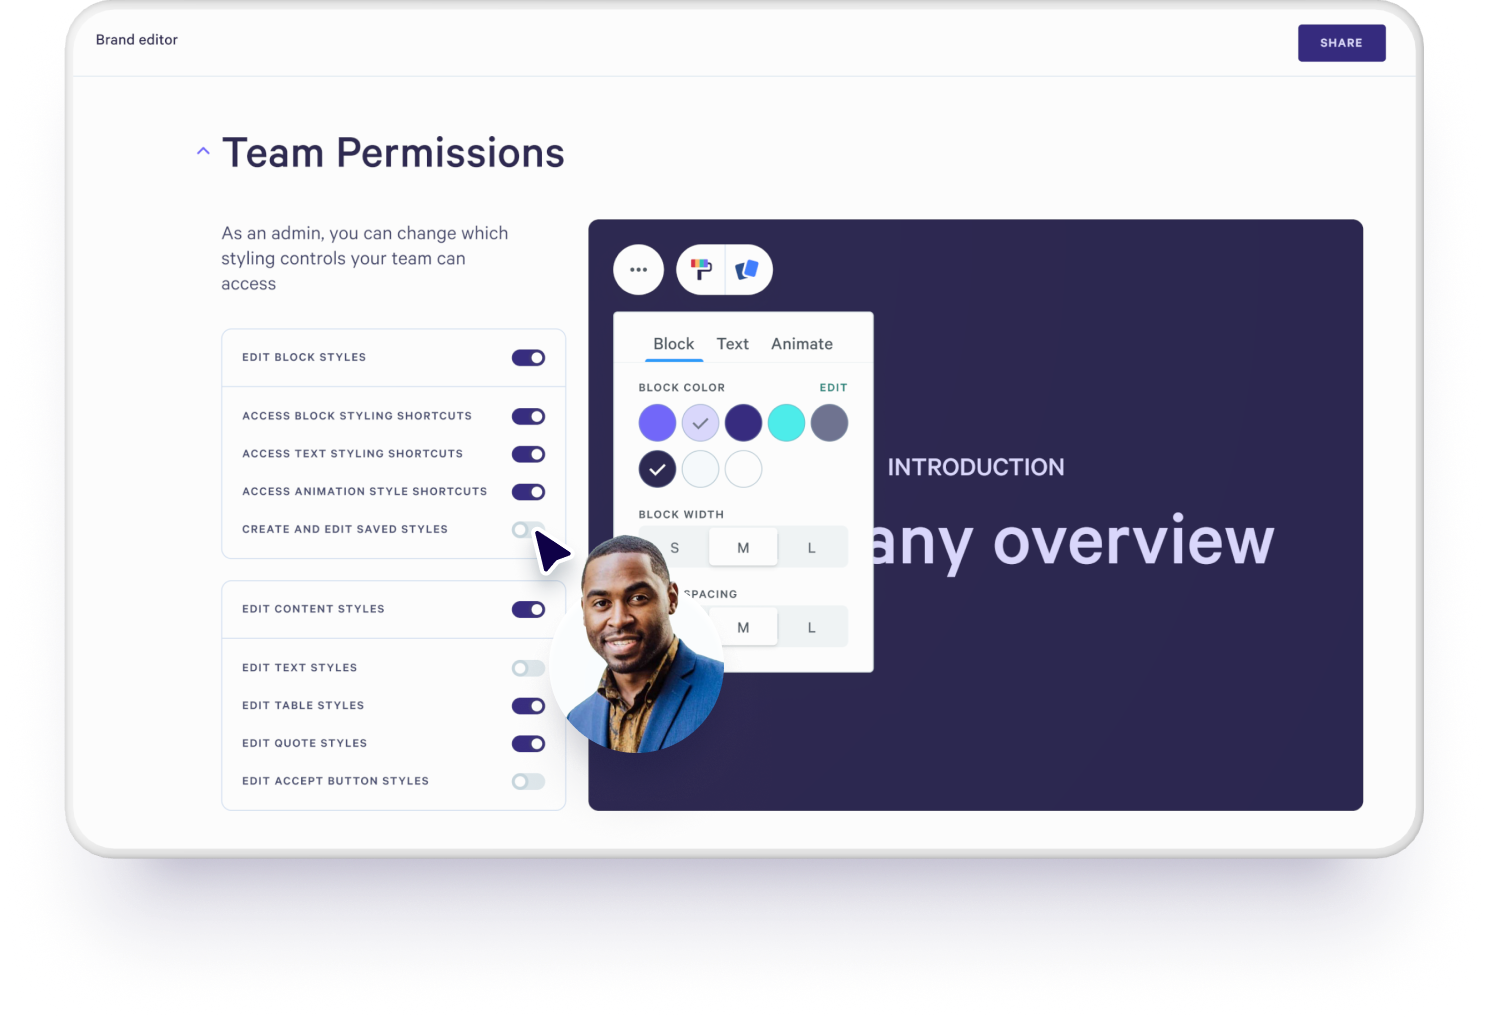 Set up team permissions to limit edit access and create brand consistency